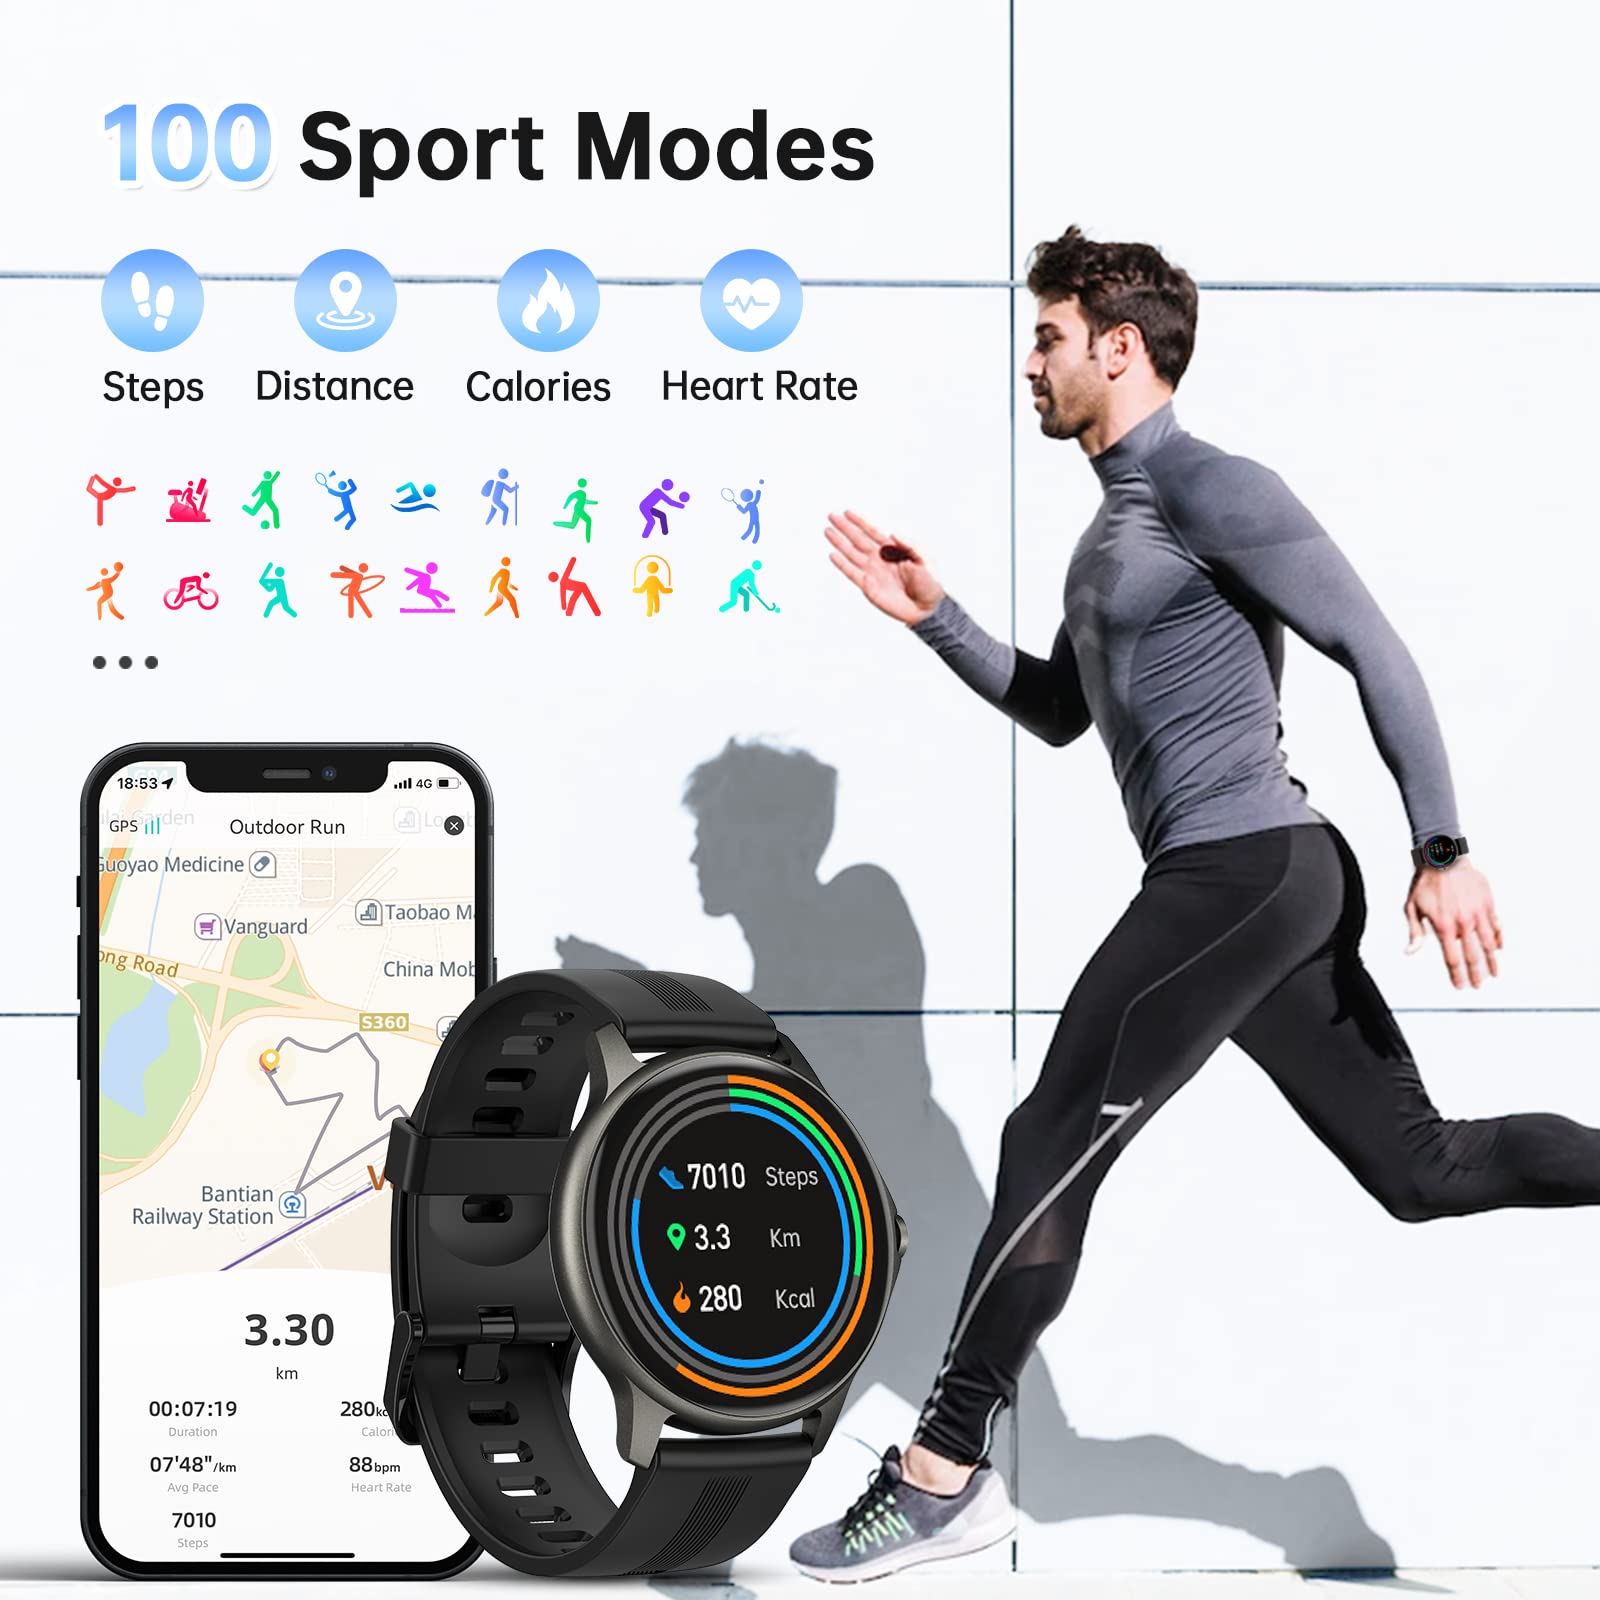 Fitpolo Smartwatch LW51（USE CODE:LW51 to get $57 off）